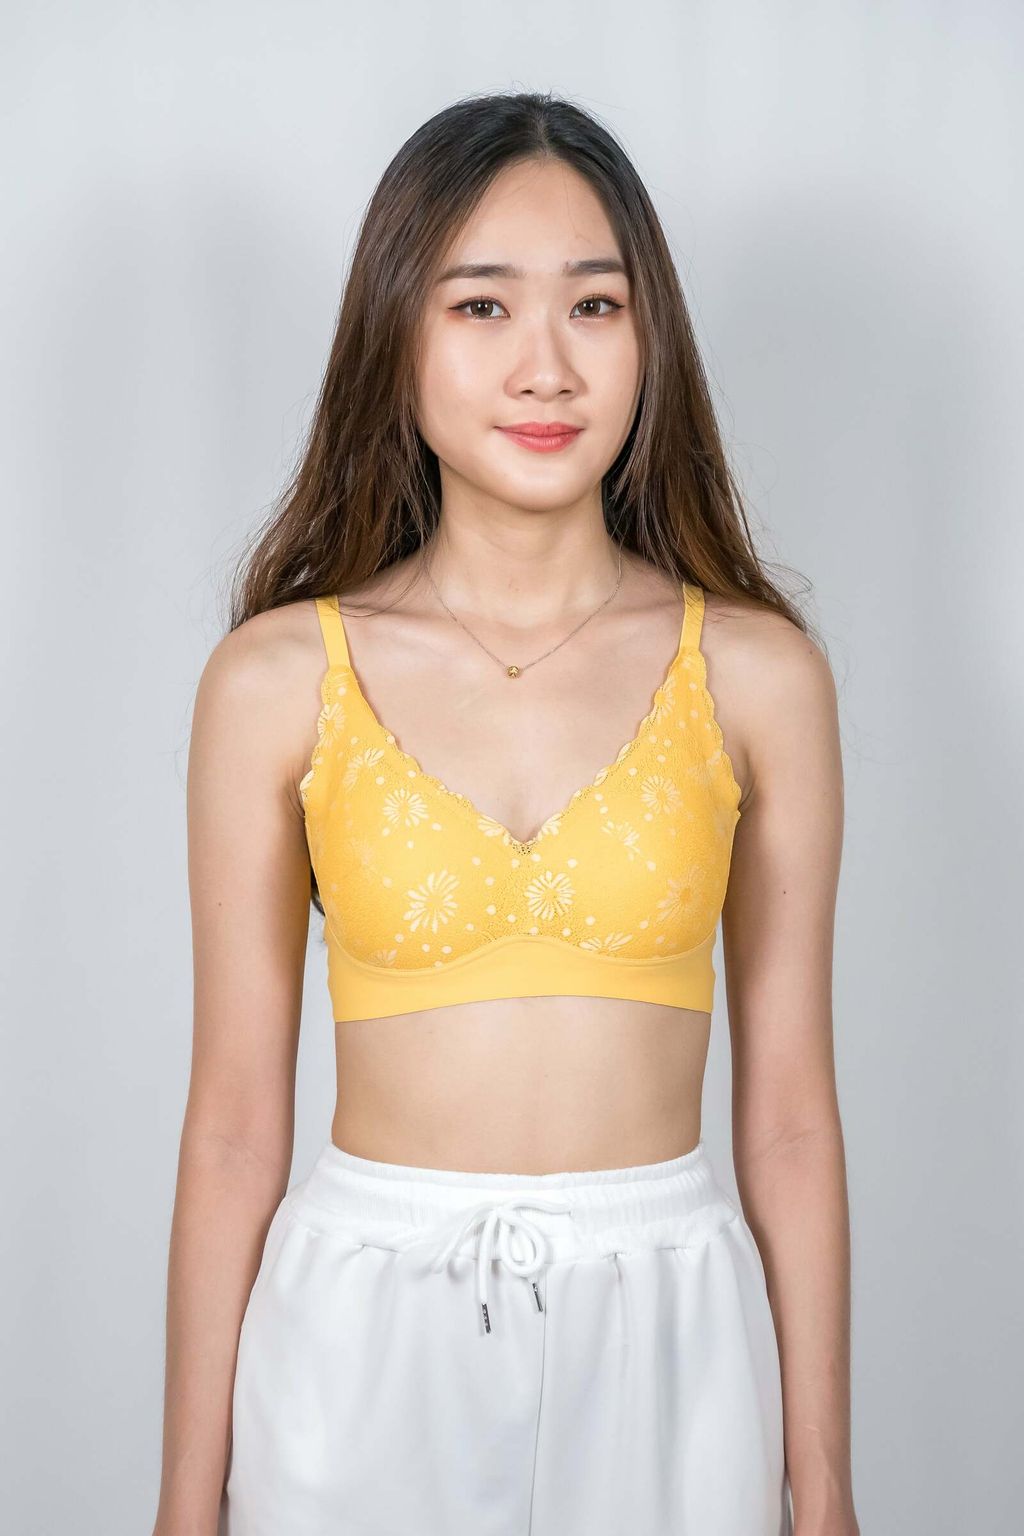 Daisy Lacy Bralette – Oh! Miss Dainty